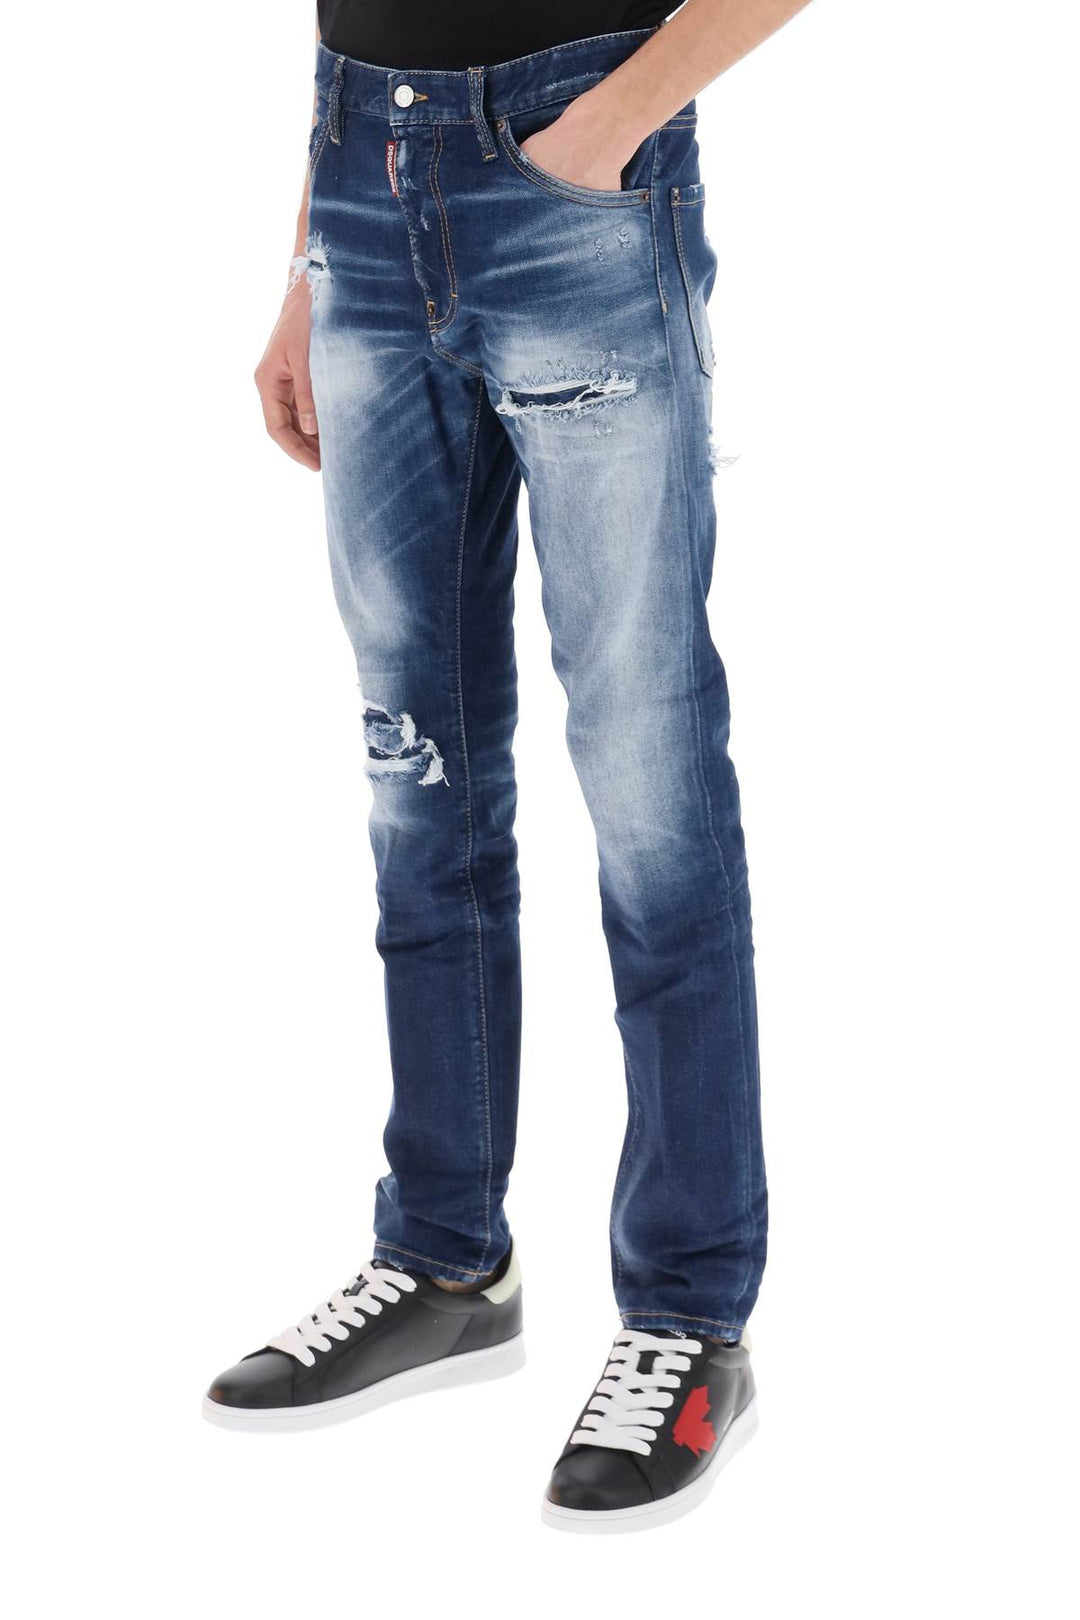 Dsquared2 Cool Guy Jeans In Medium Worn Out Booty Wash   Blu